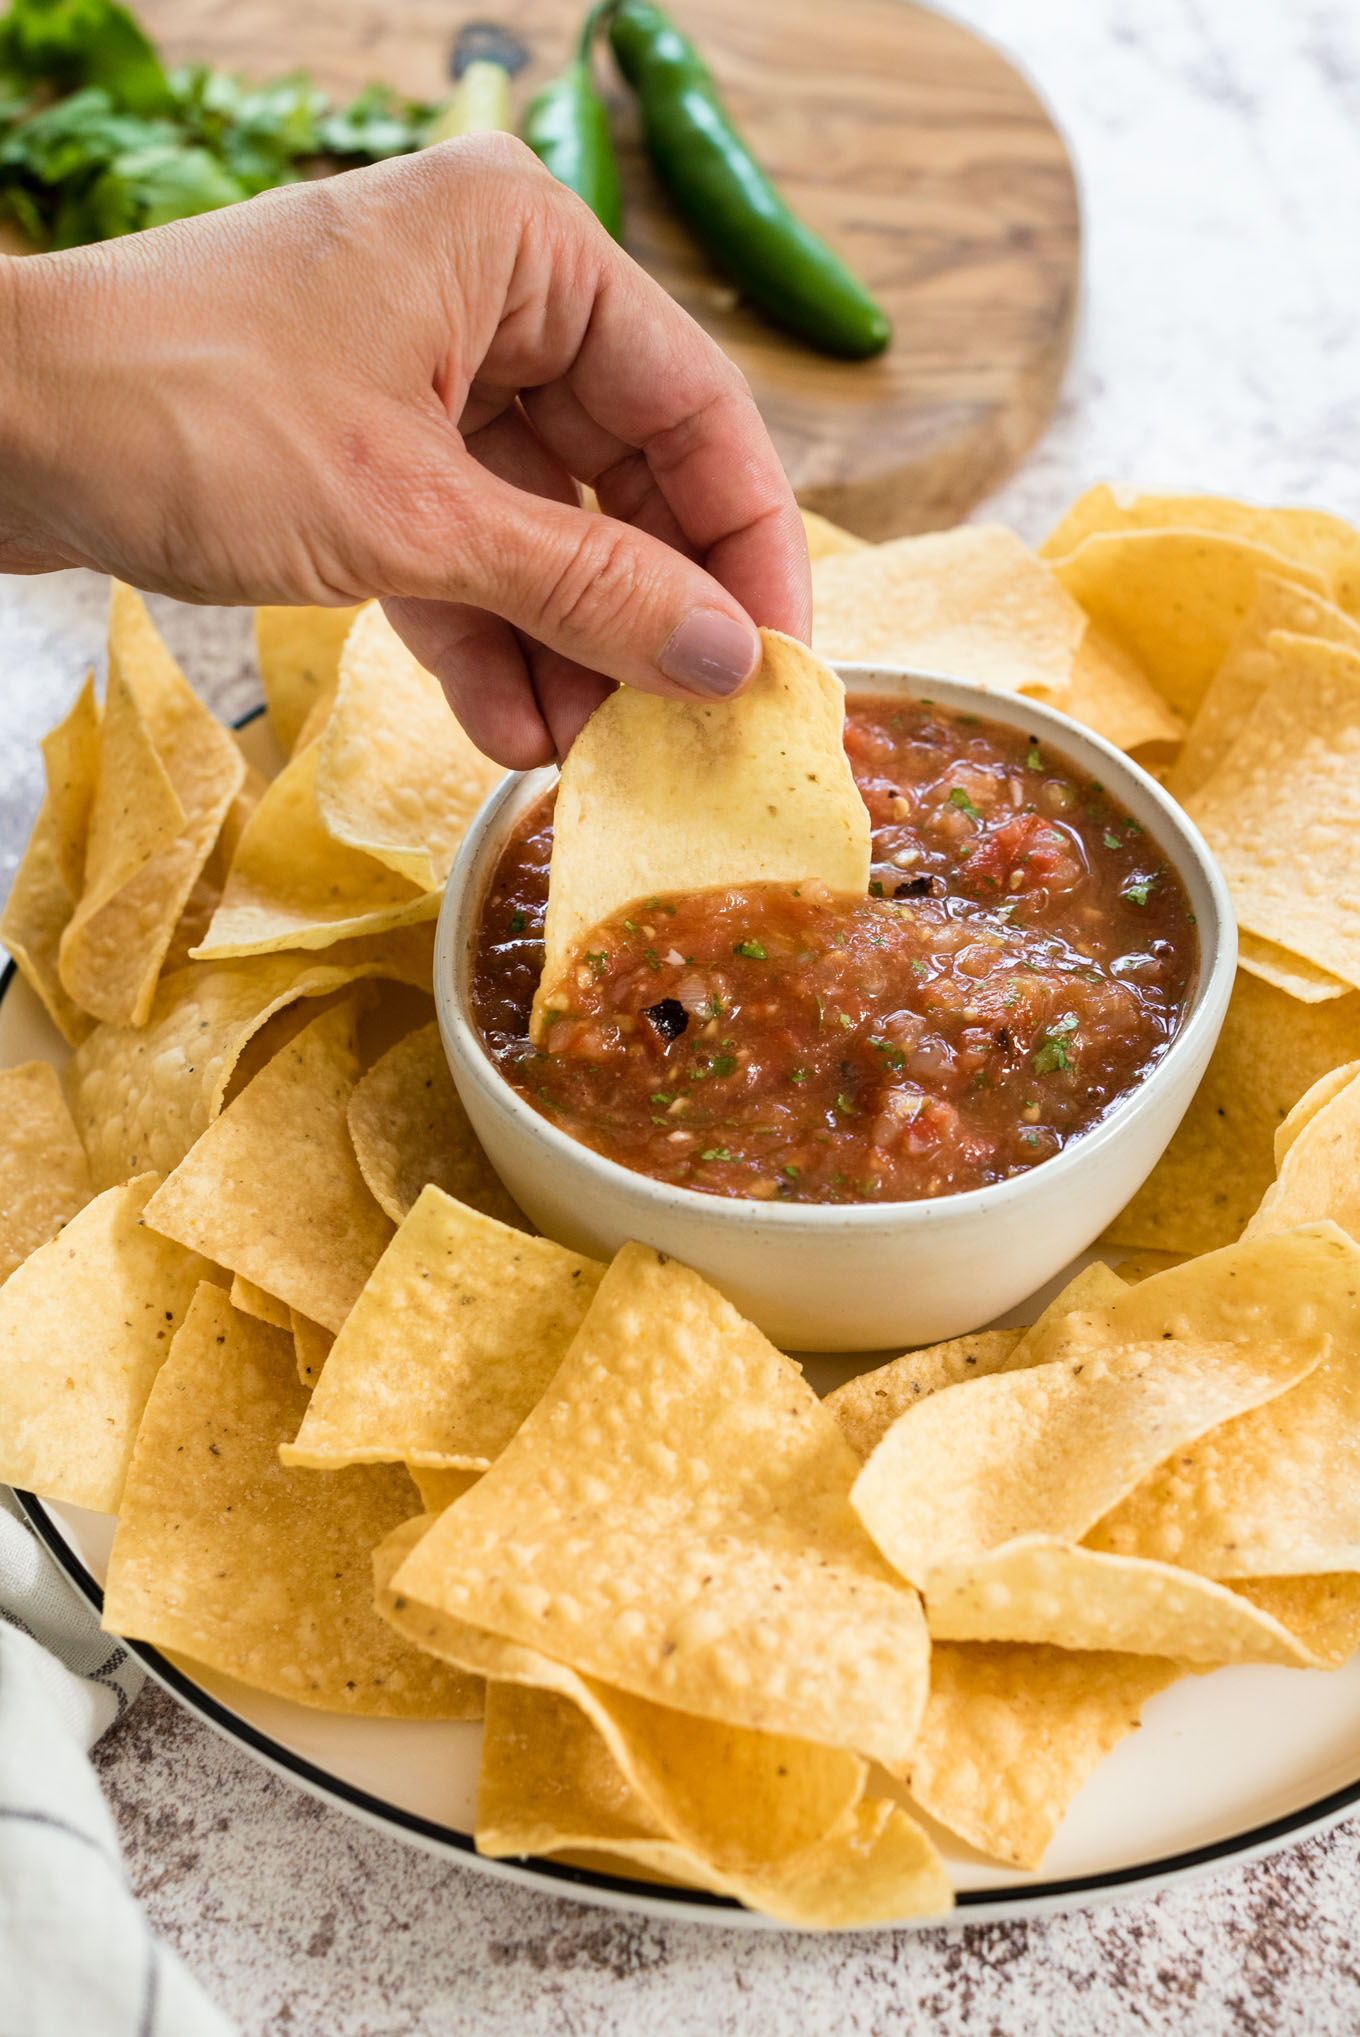 Hand dipping chip into bowl of salsa